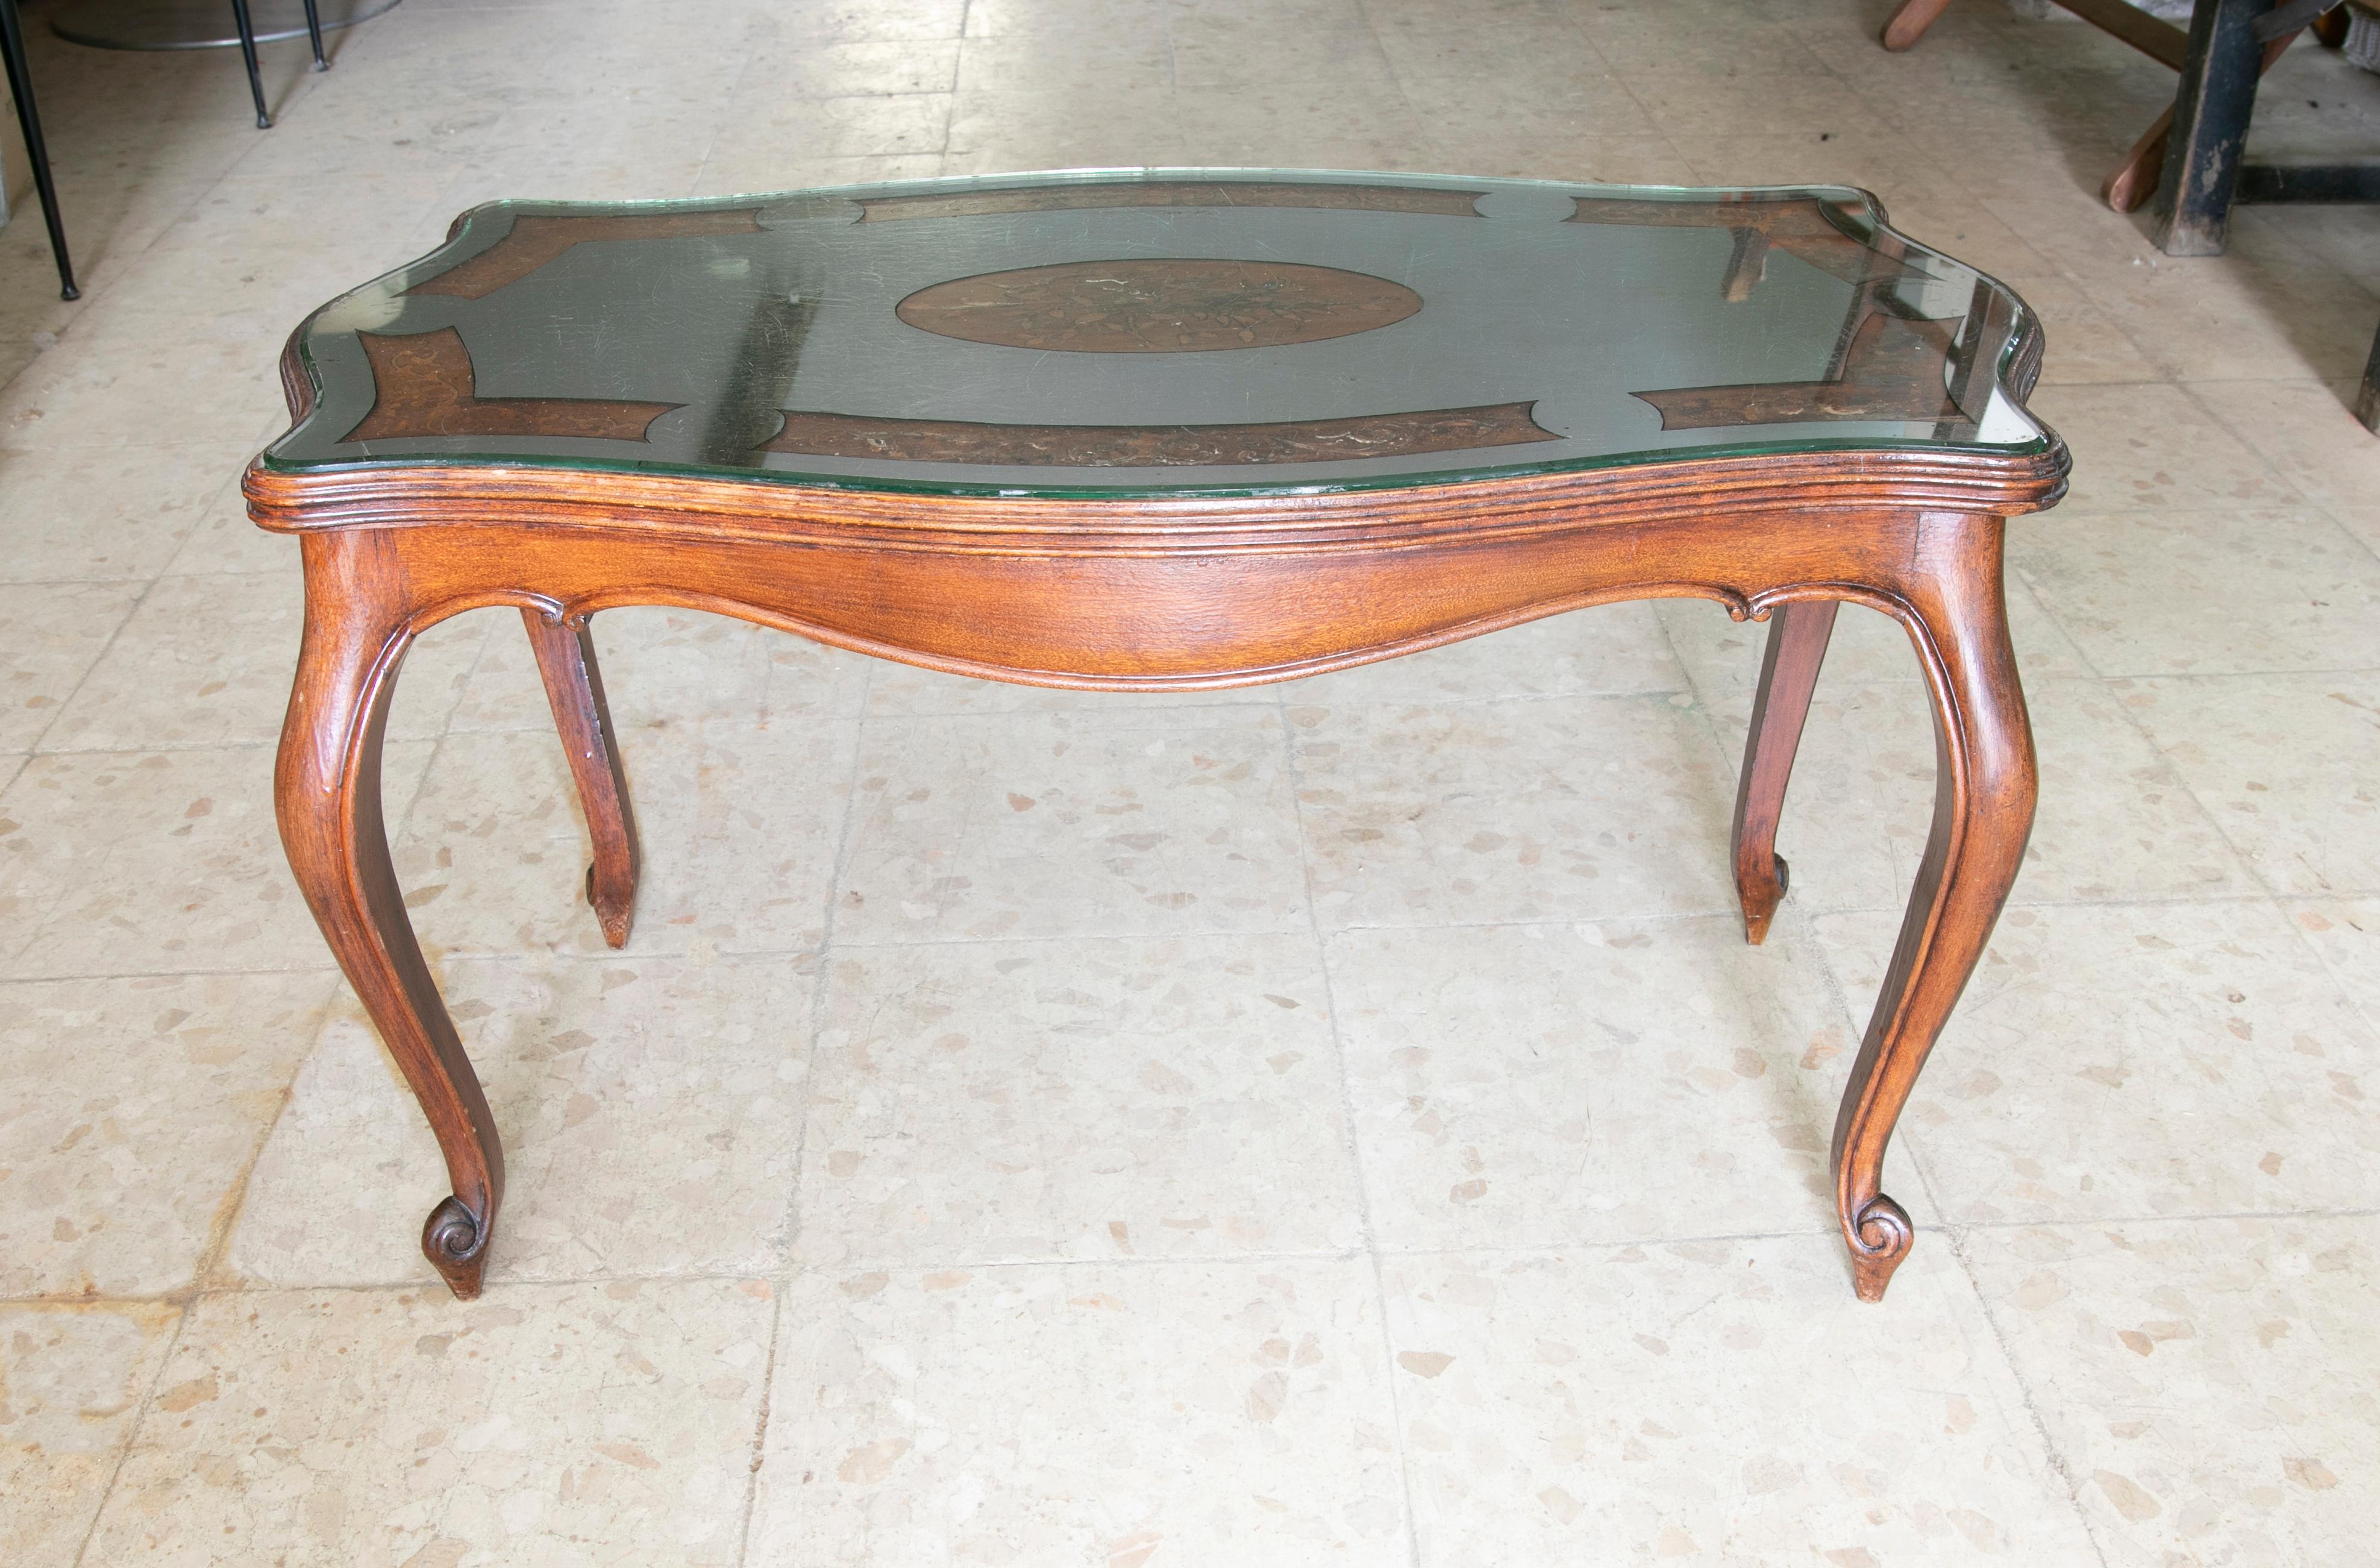 Wooden side table with inlaid top and mirrored top.